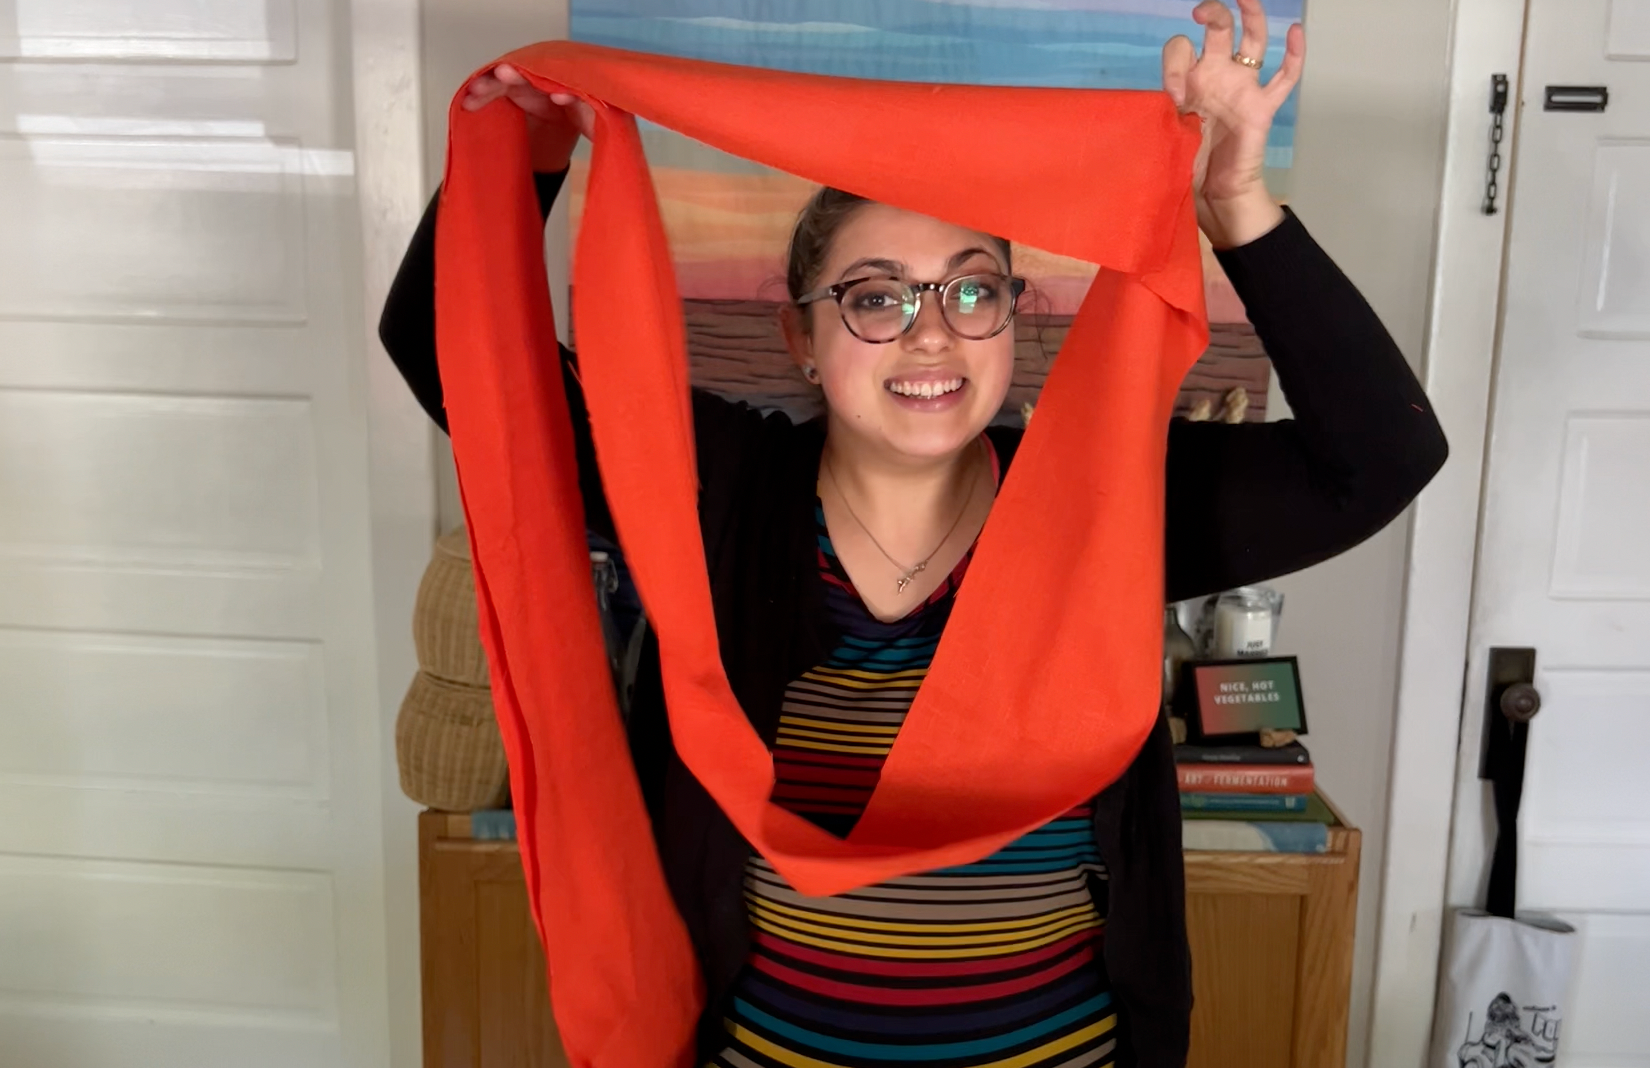 Holding up a loop of fabric for one of the tiers and smiling through it like it's a window